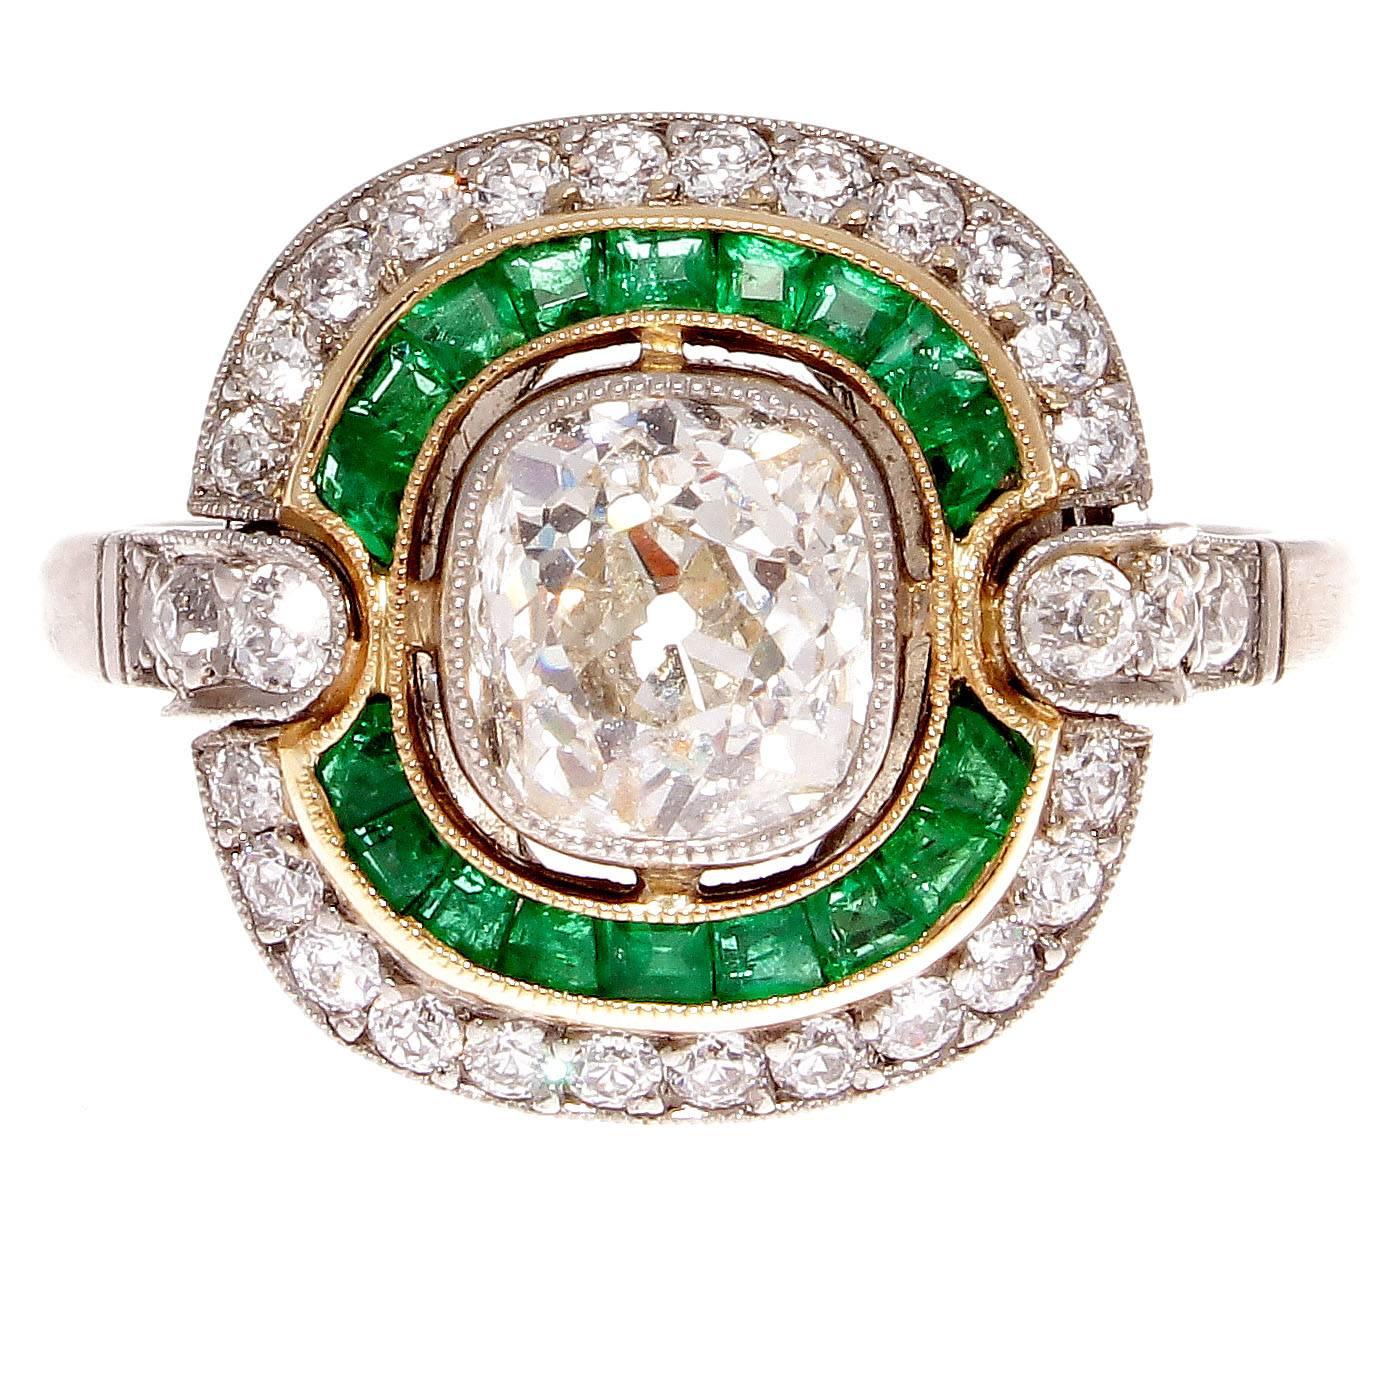 A double halo of intricacy and vibrant colors to create this vintage inspired engagement ring. Featuring a 1.18 carat old mine cut diamond that is J color, SI2 clarity surrounded by celestial circles of glowing forest green emeralds and numerous old